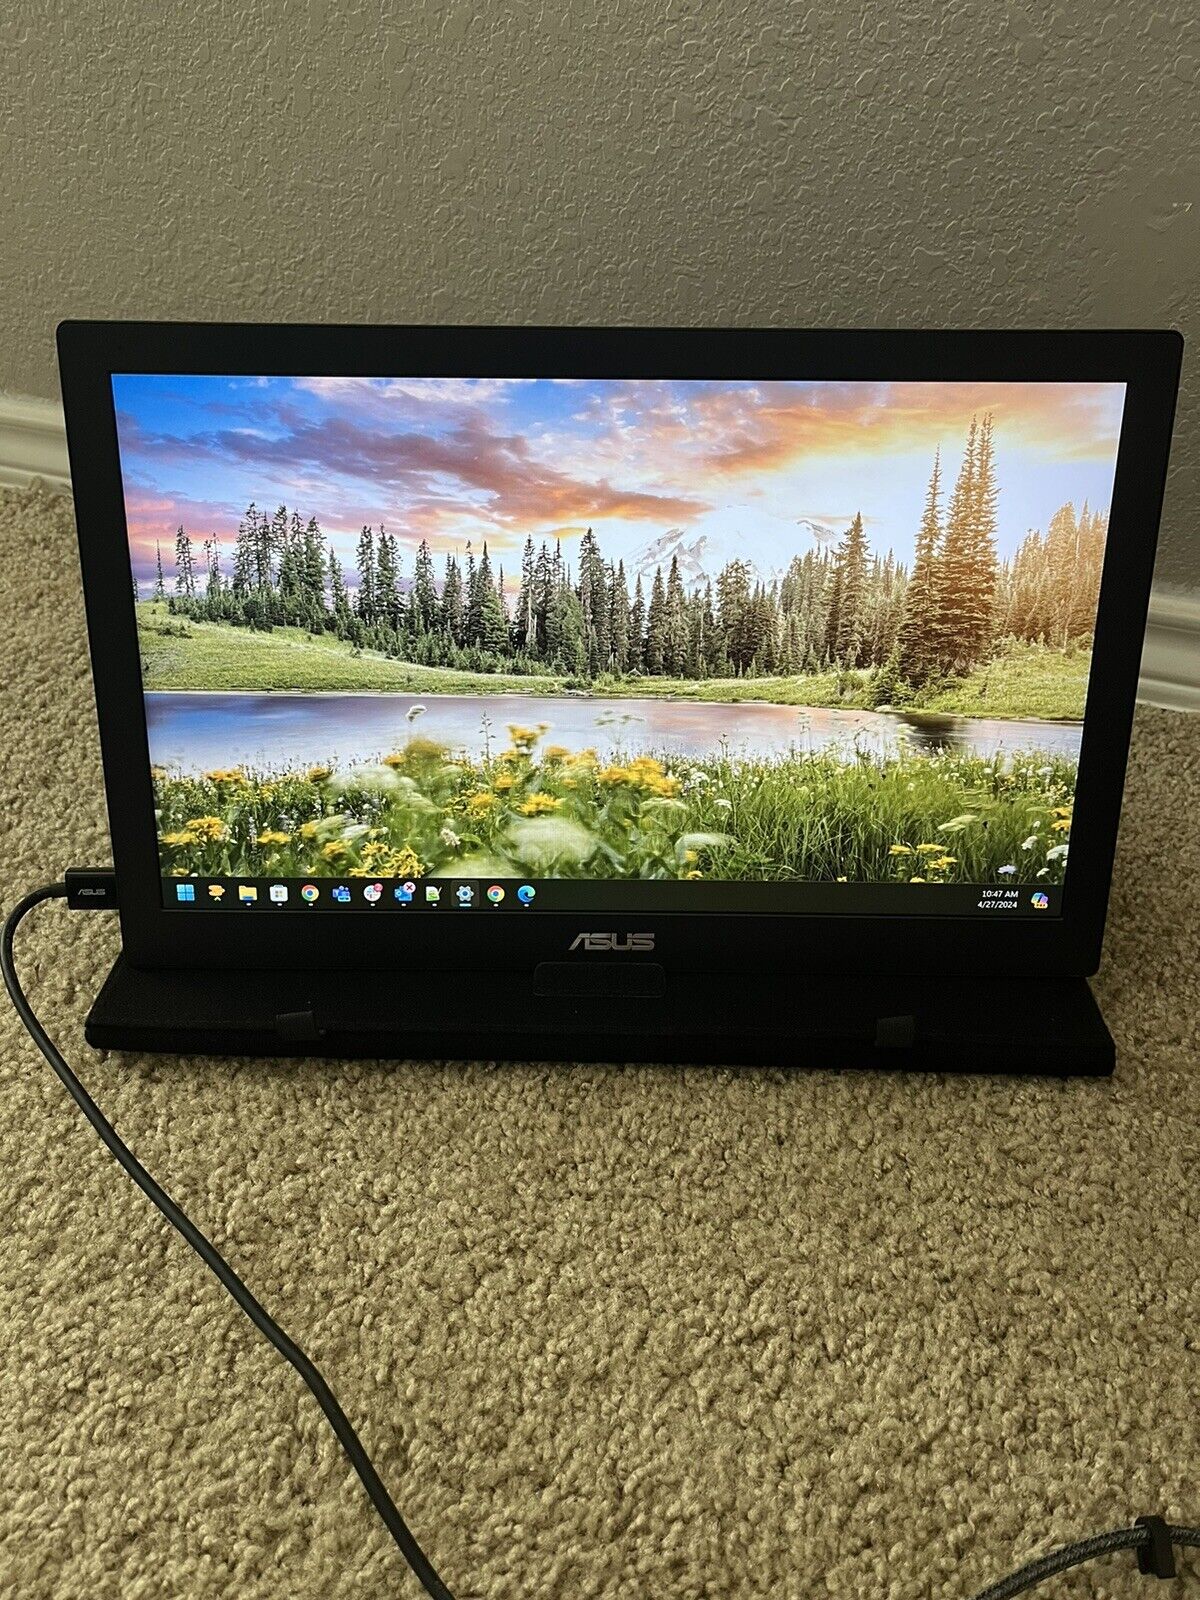 ASUS MB169B+ 15.6” Portable Monitor FHD 1920x1080 DisplayLink With Case & Cable